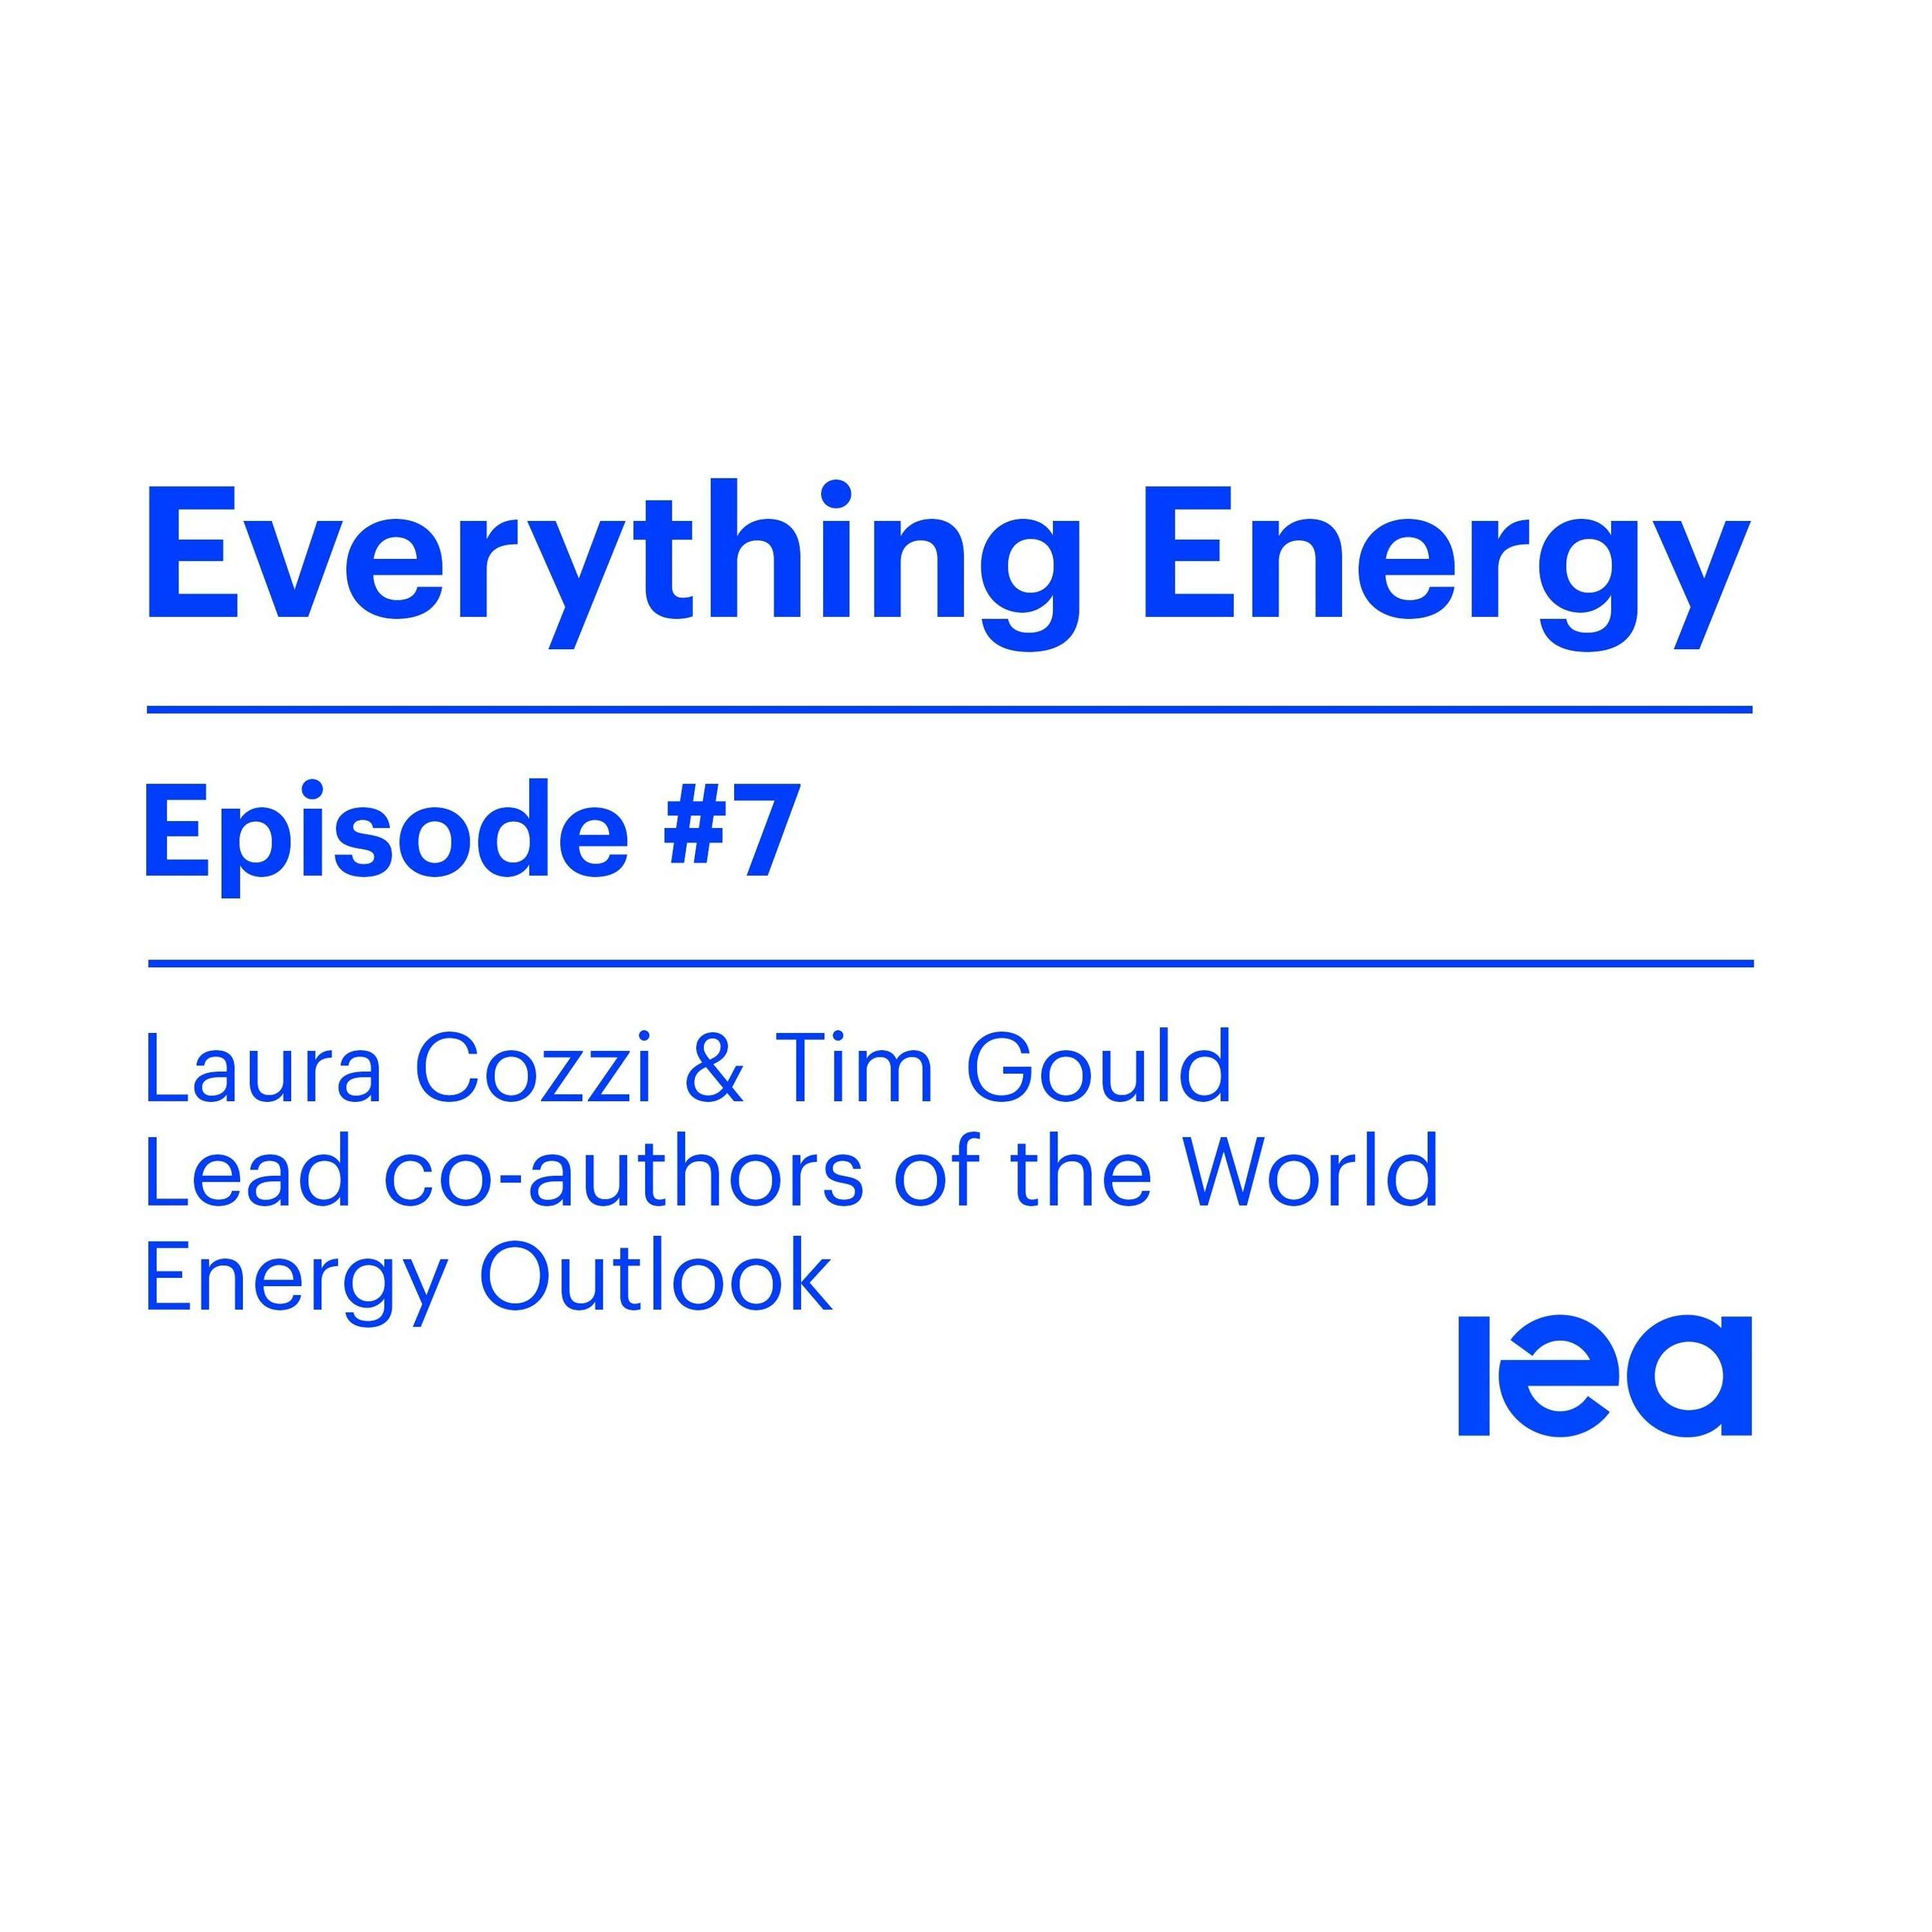 Episode 7: World Energy Outlook 2020 - There is no single storyline about the future